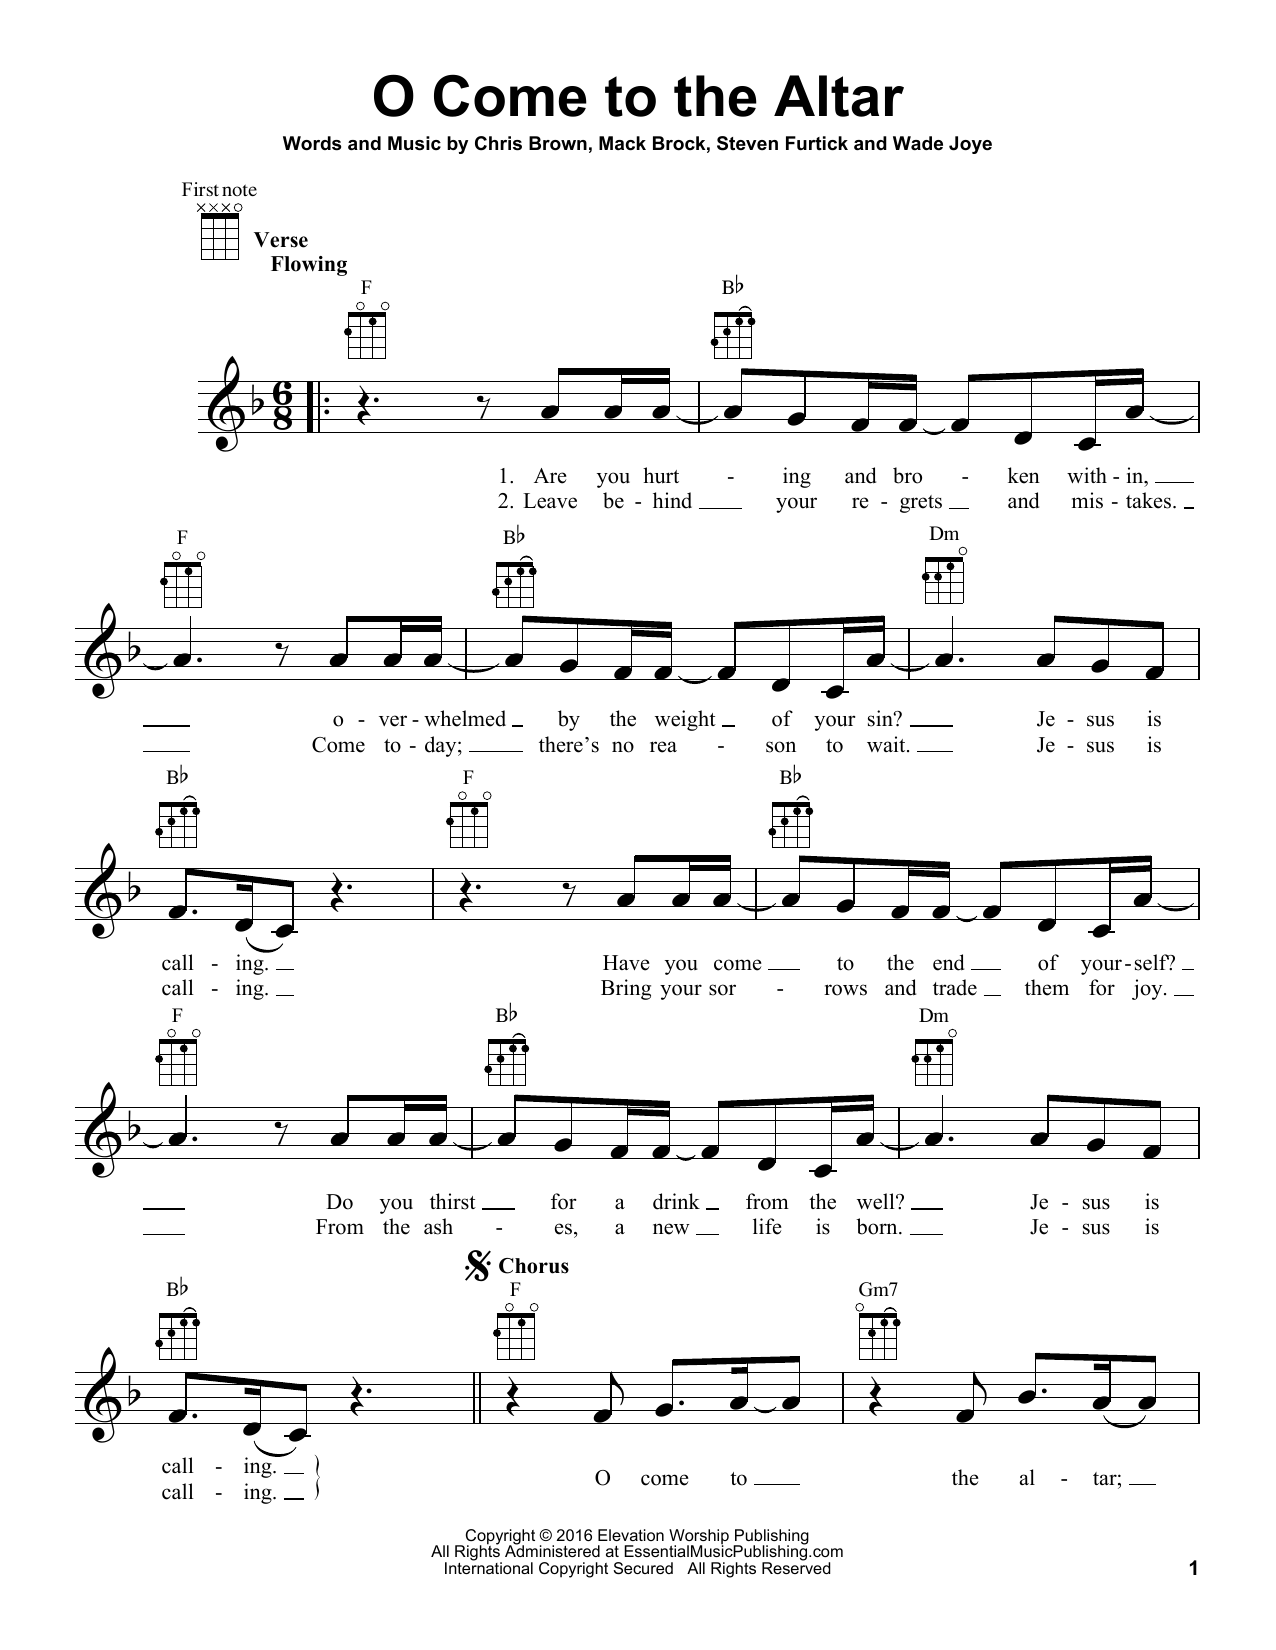 Elevation Worship O Come To The Altar sheet music notes printable PDF score